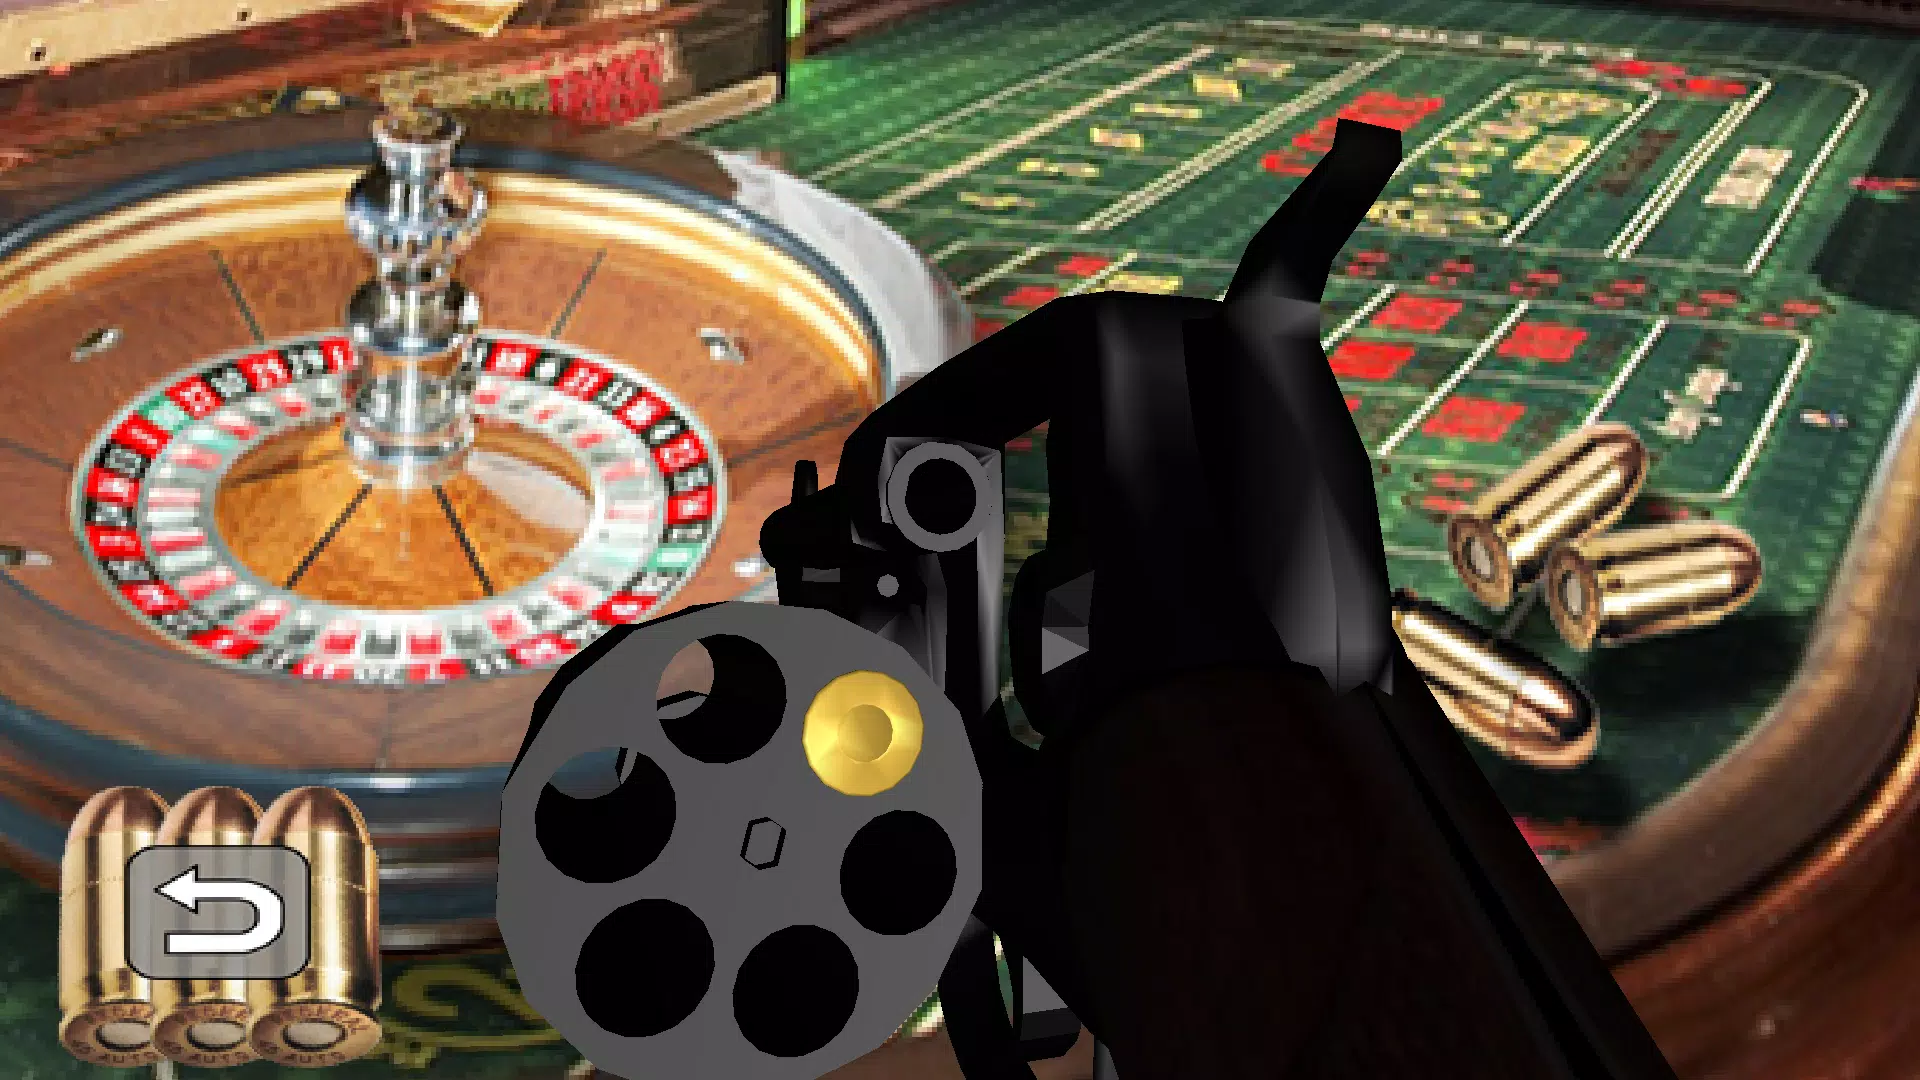 Download Russian Roulette (Windows) - My Abandonware